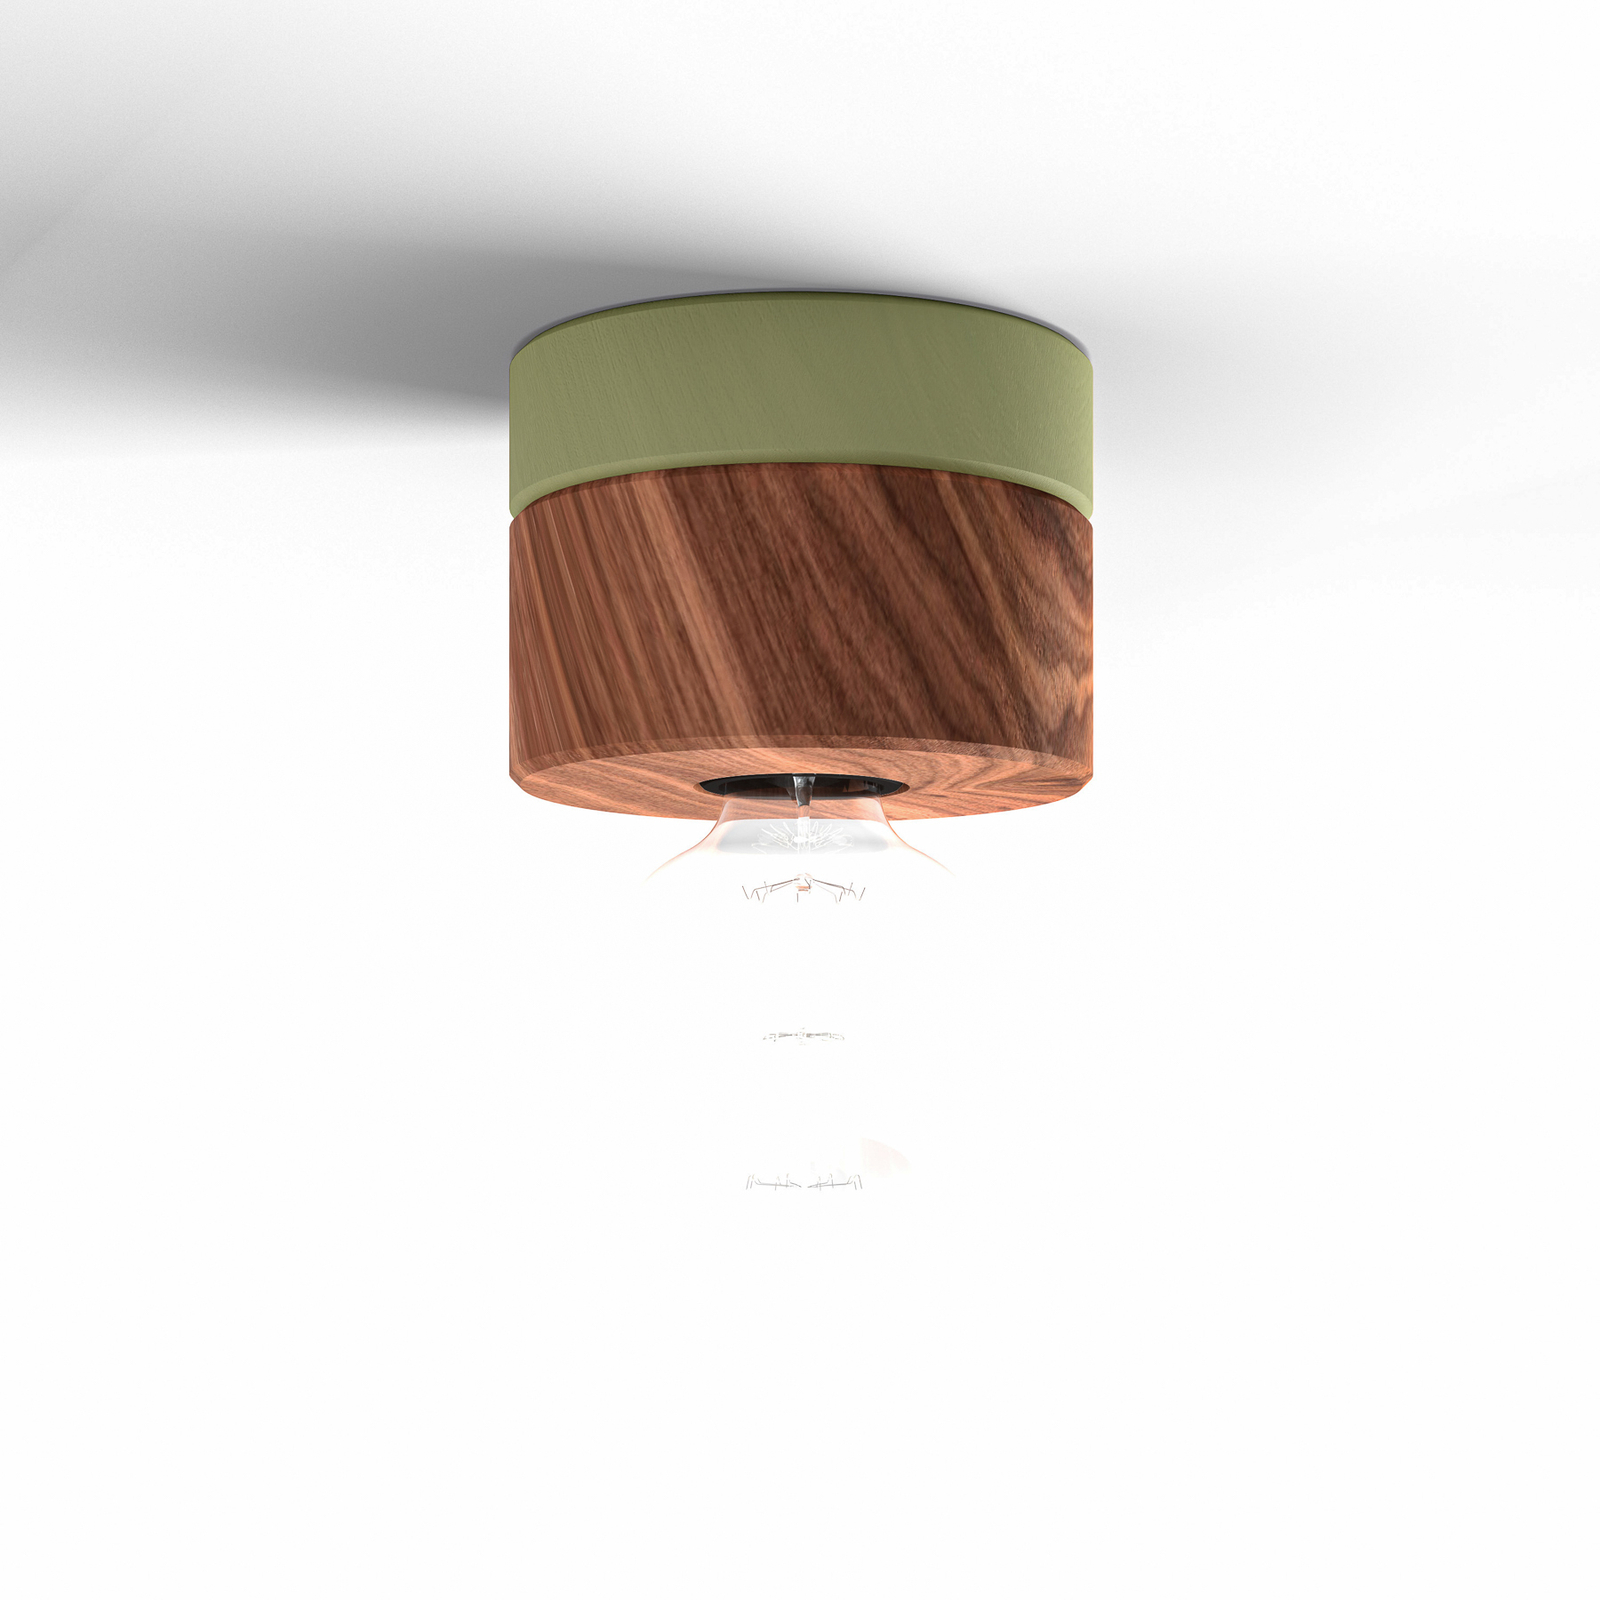 ALMUT 0239 ceiling lamp, sustainable, walnut/green